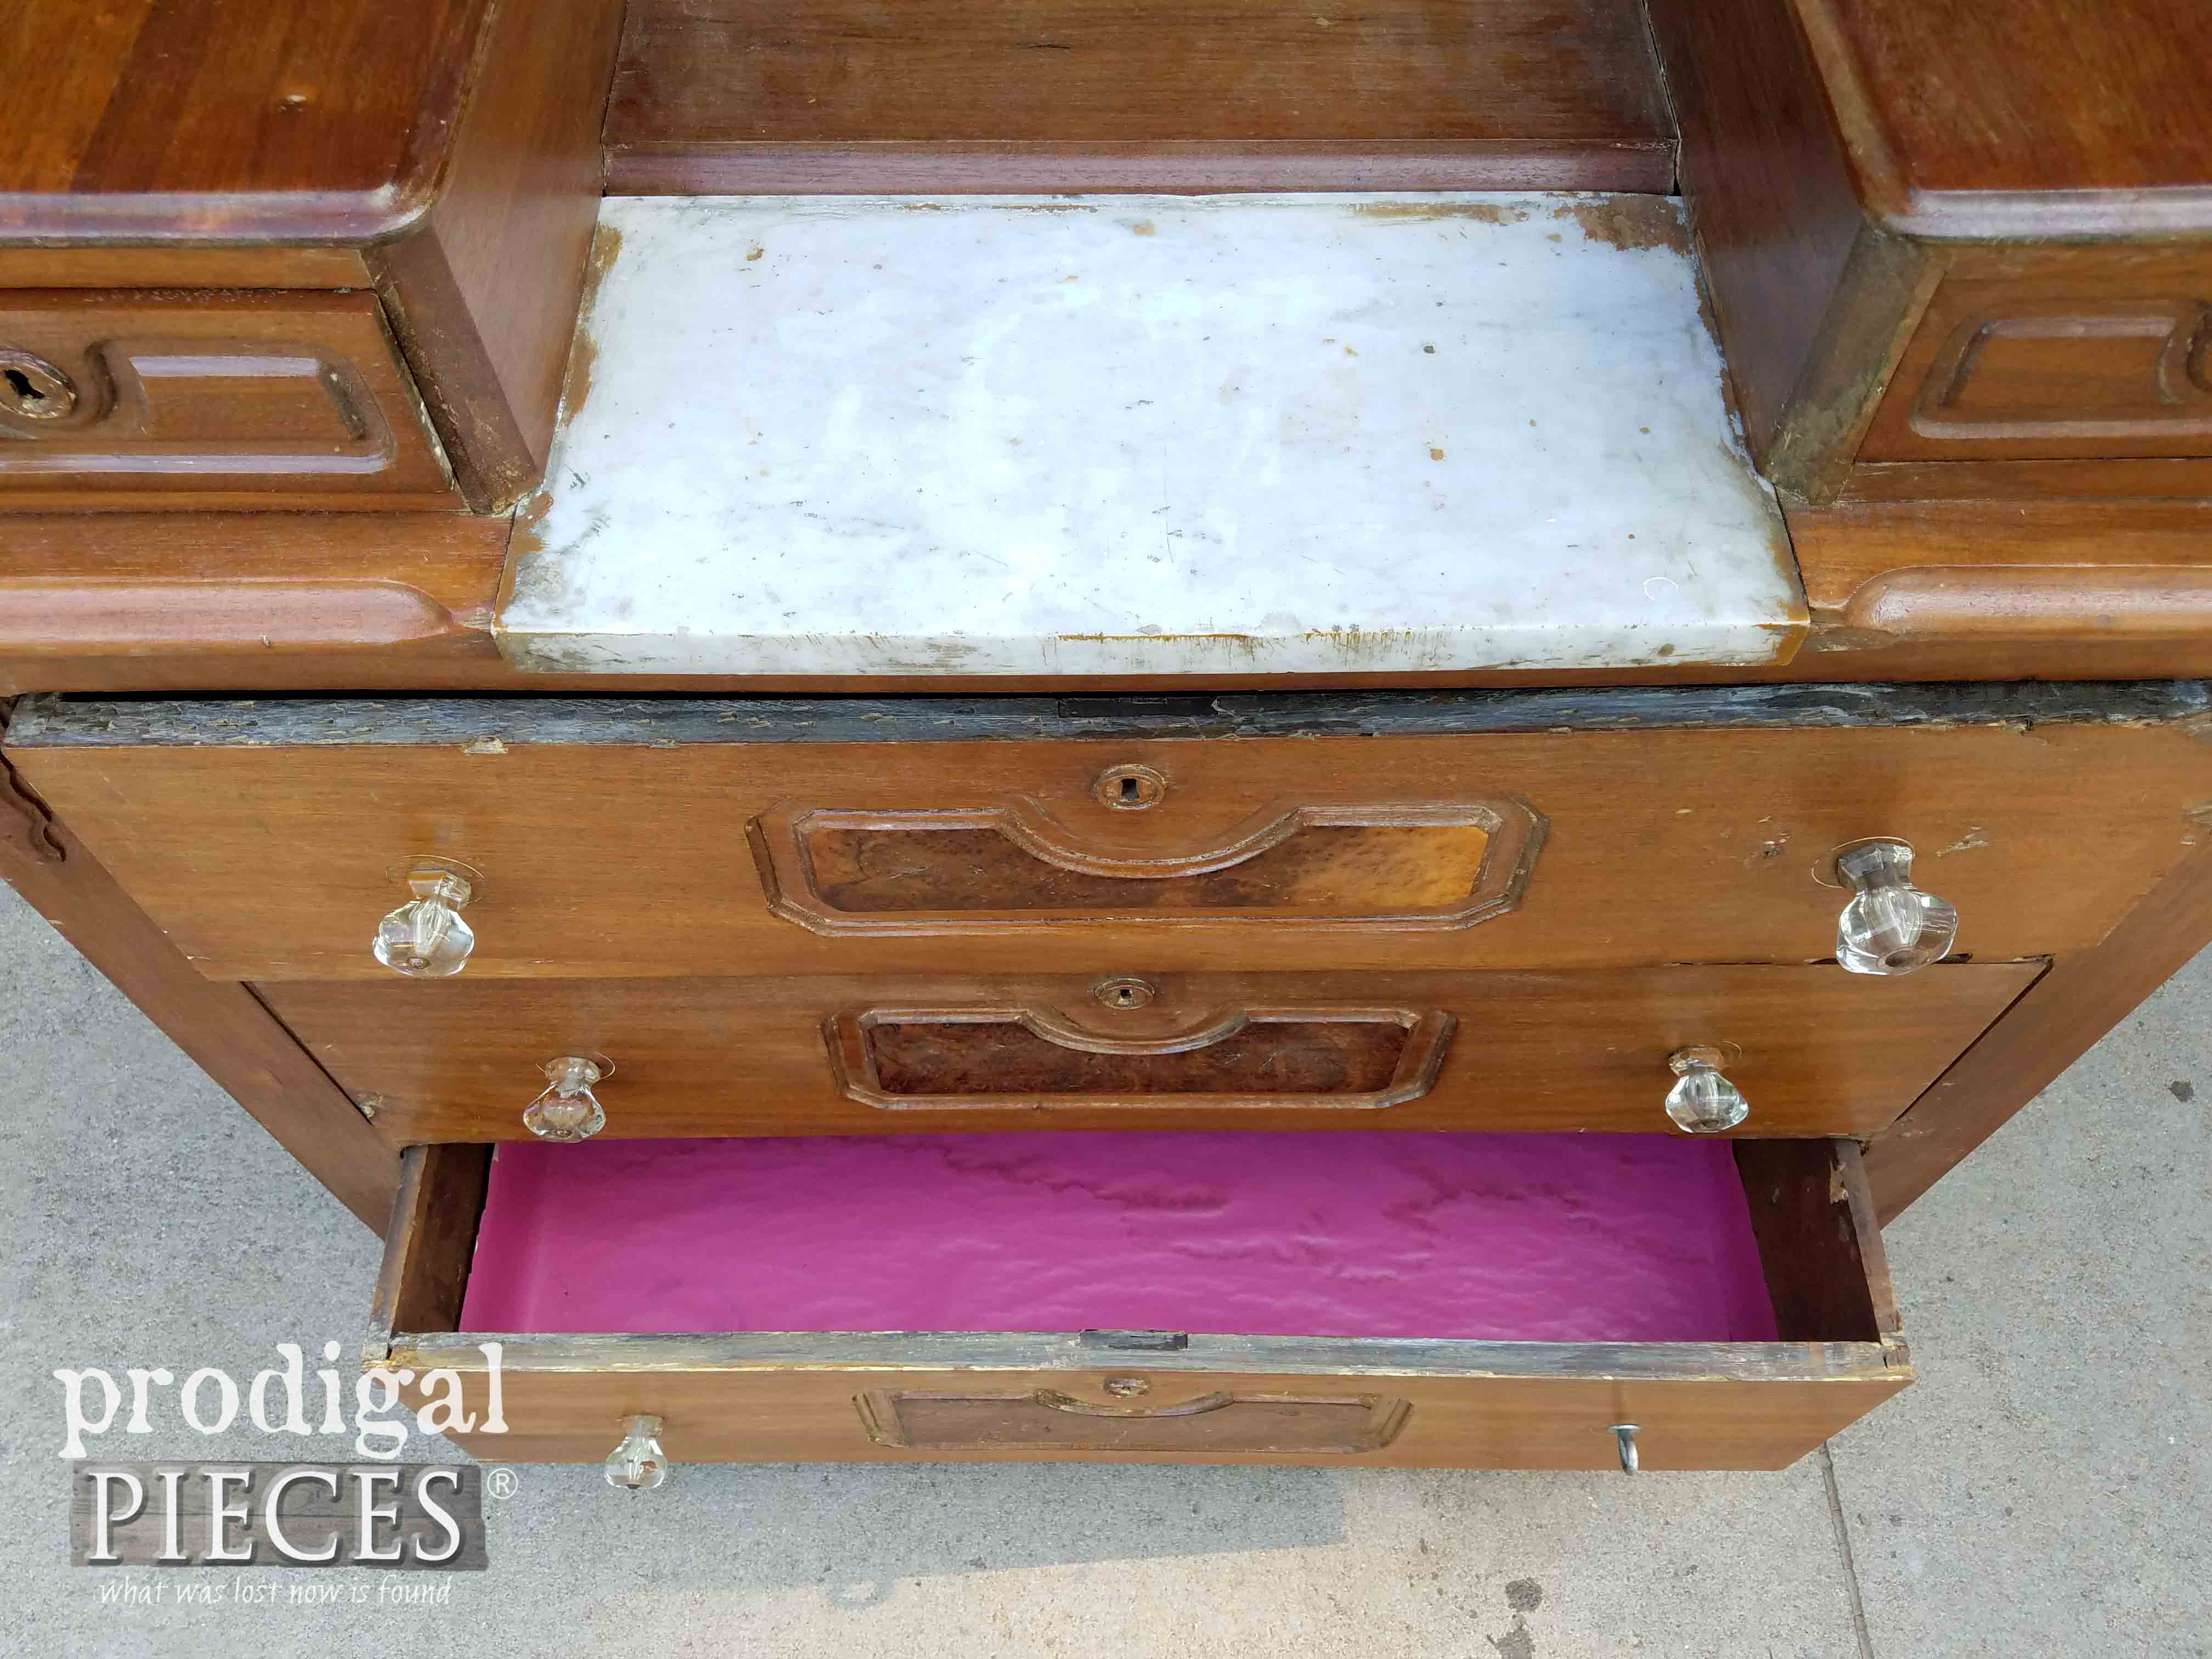 Open Chest Drawer with Pink Lining | prodigalpieces.com